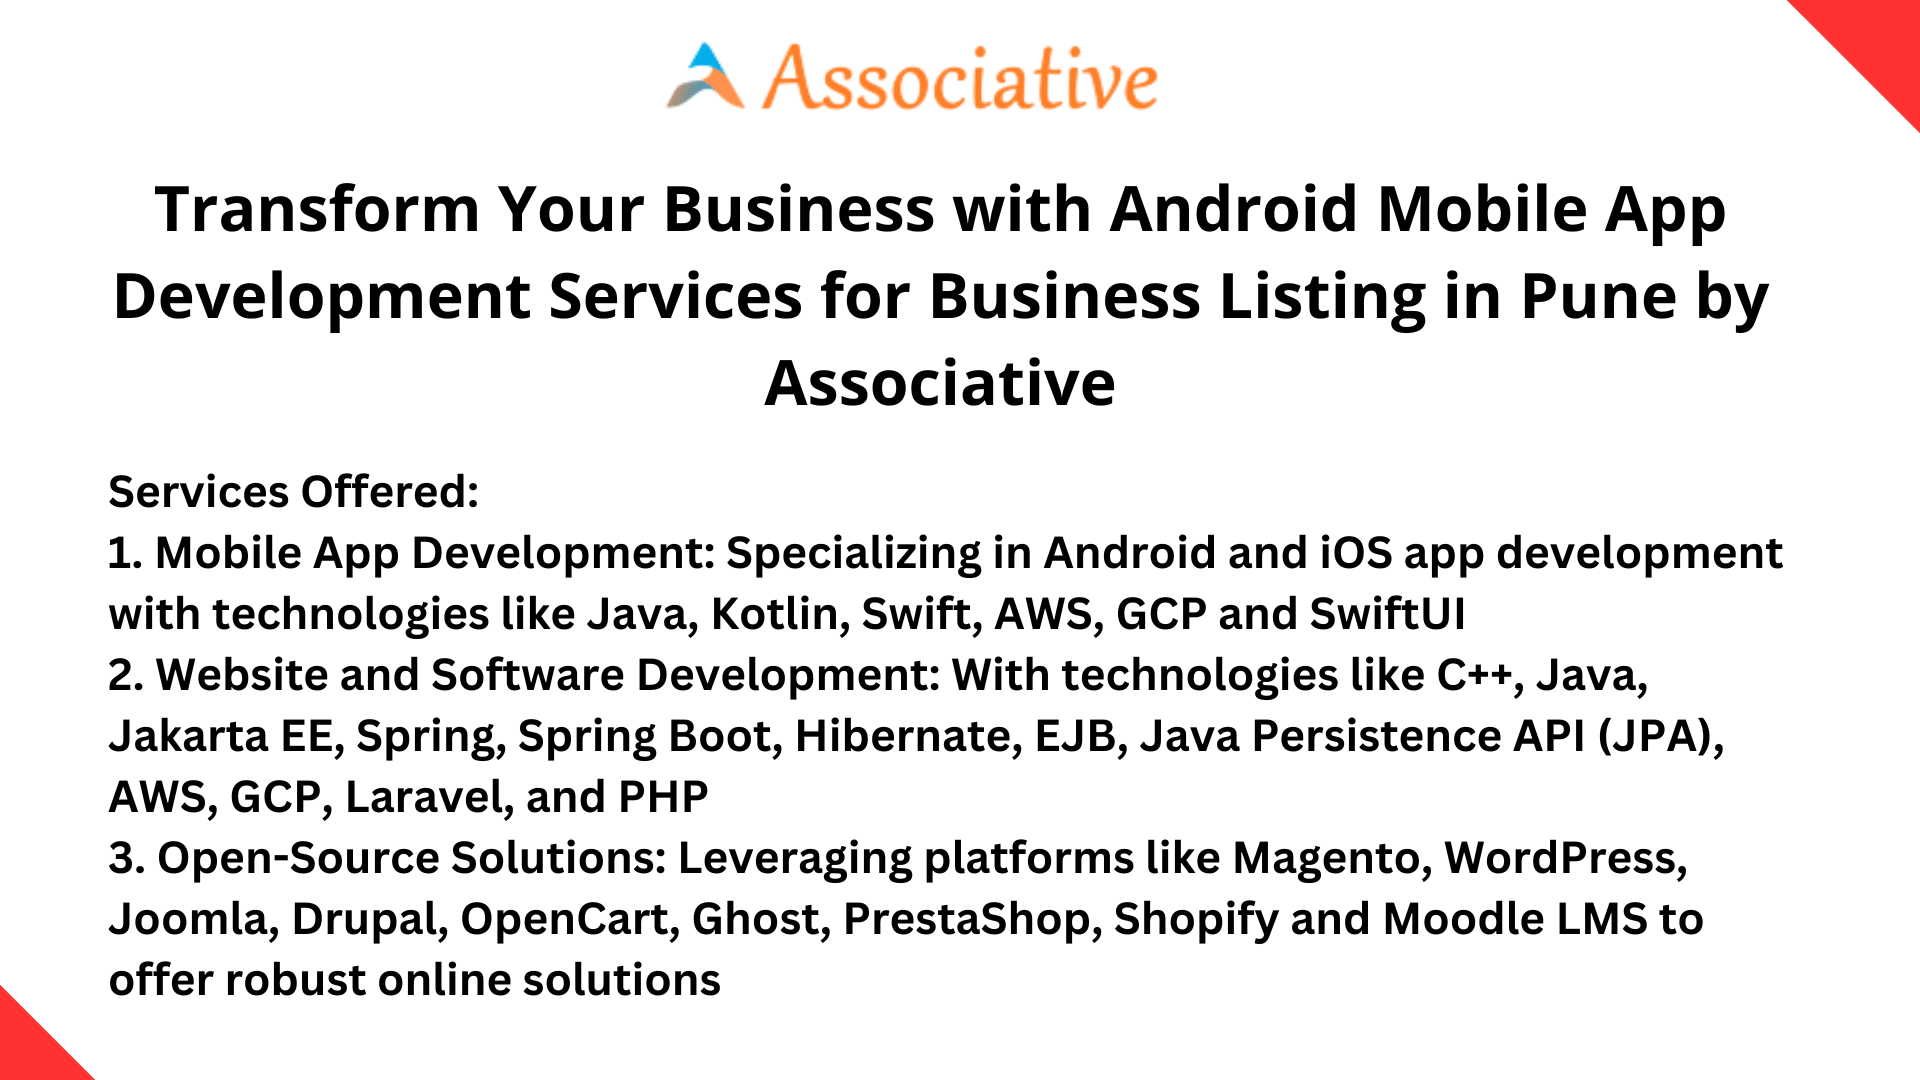 Transform Your Business with Android Mobile App Development Services for Business Listing in Pune by Associative